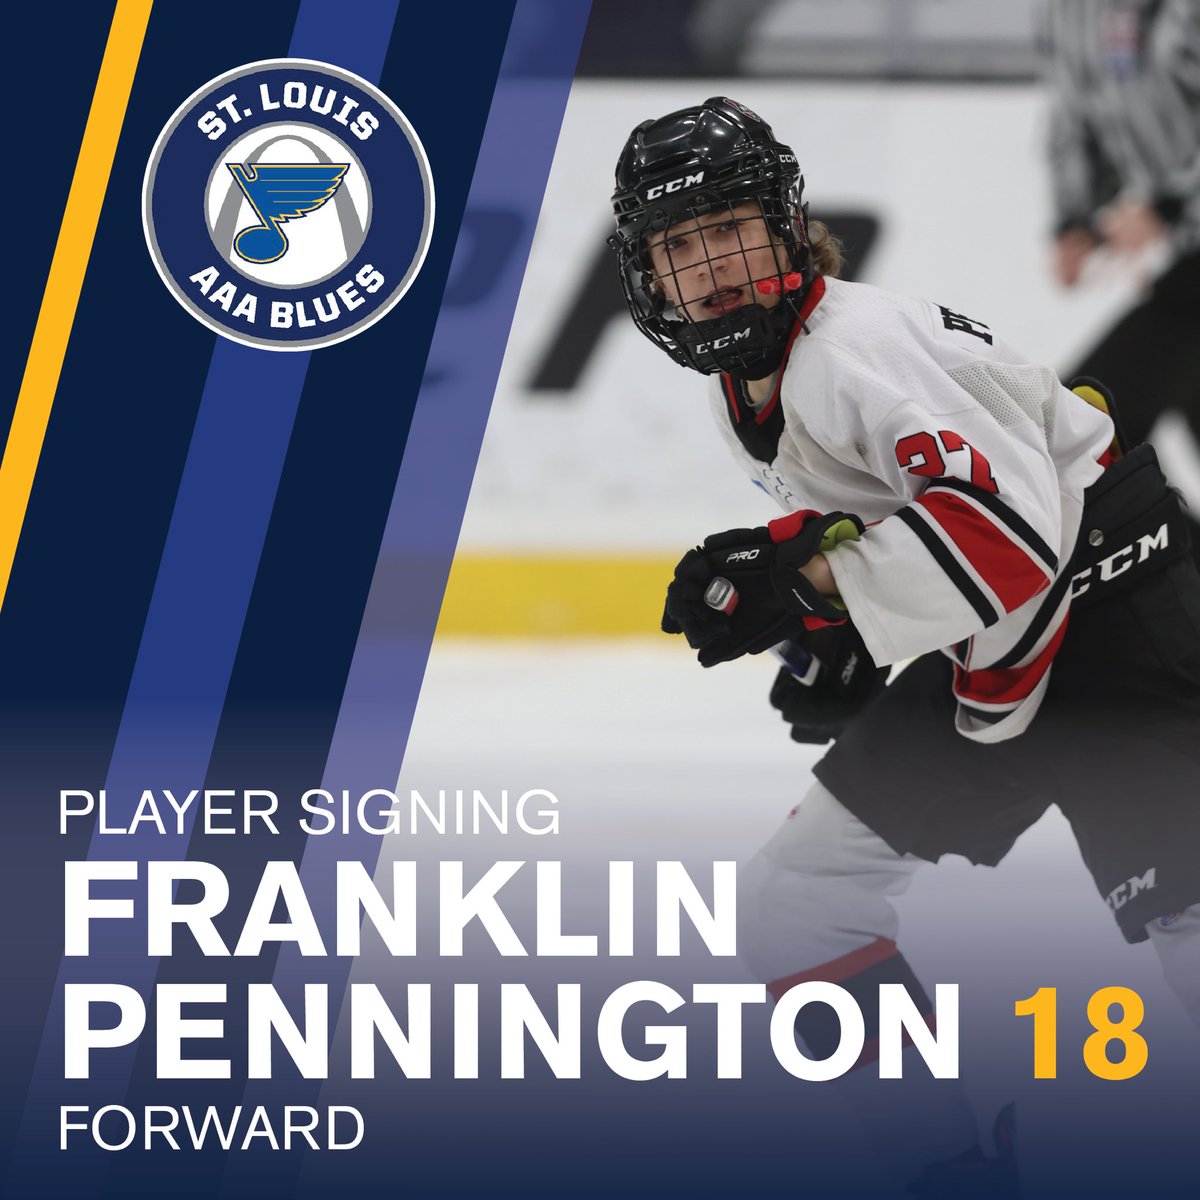 2023-24 Player Signing Announcement: We are excited to welcome Franklin Pennington to the team.  Franklin joins us for his first season with the @AAABlues #BantamMinor #AAAHockey